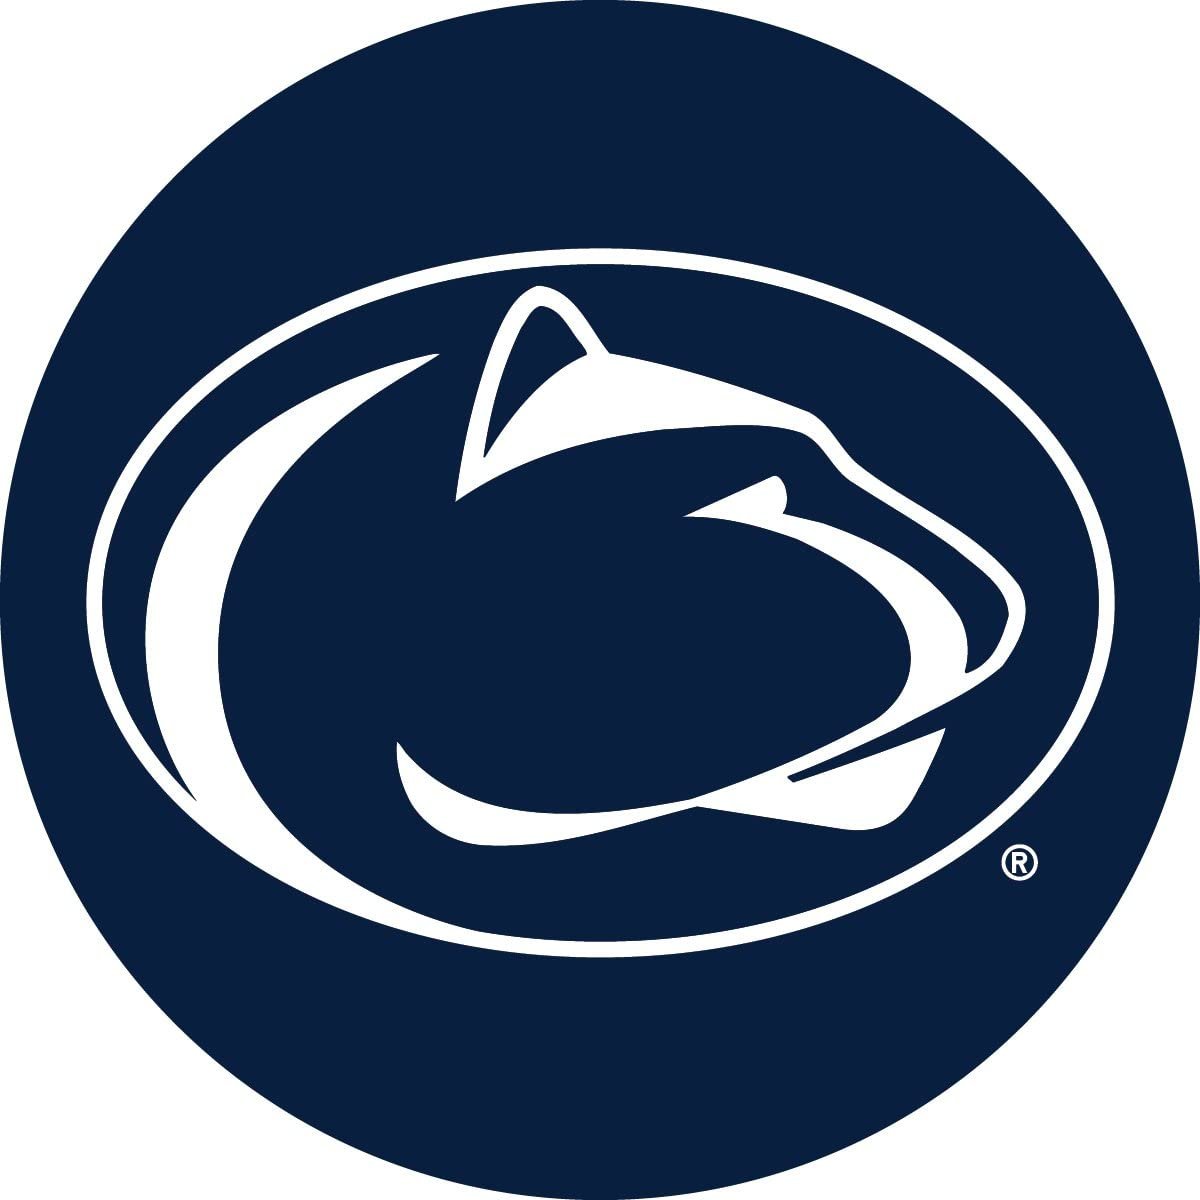 Penn State Nittany Lions Decal RR 4" Round Vinyl Auto Home Window Glass University of